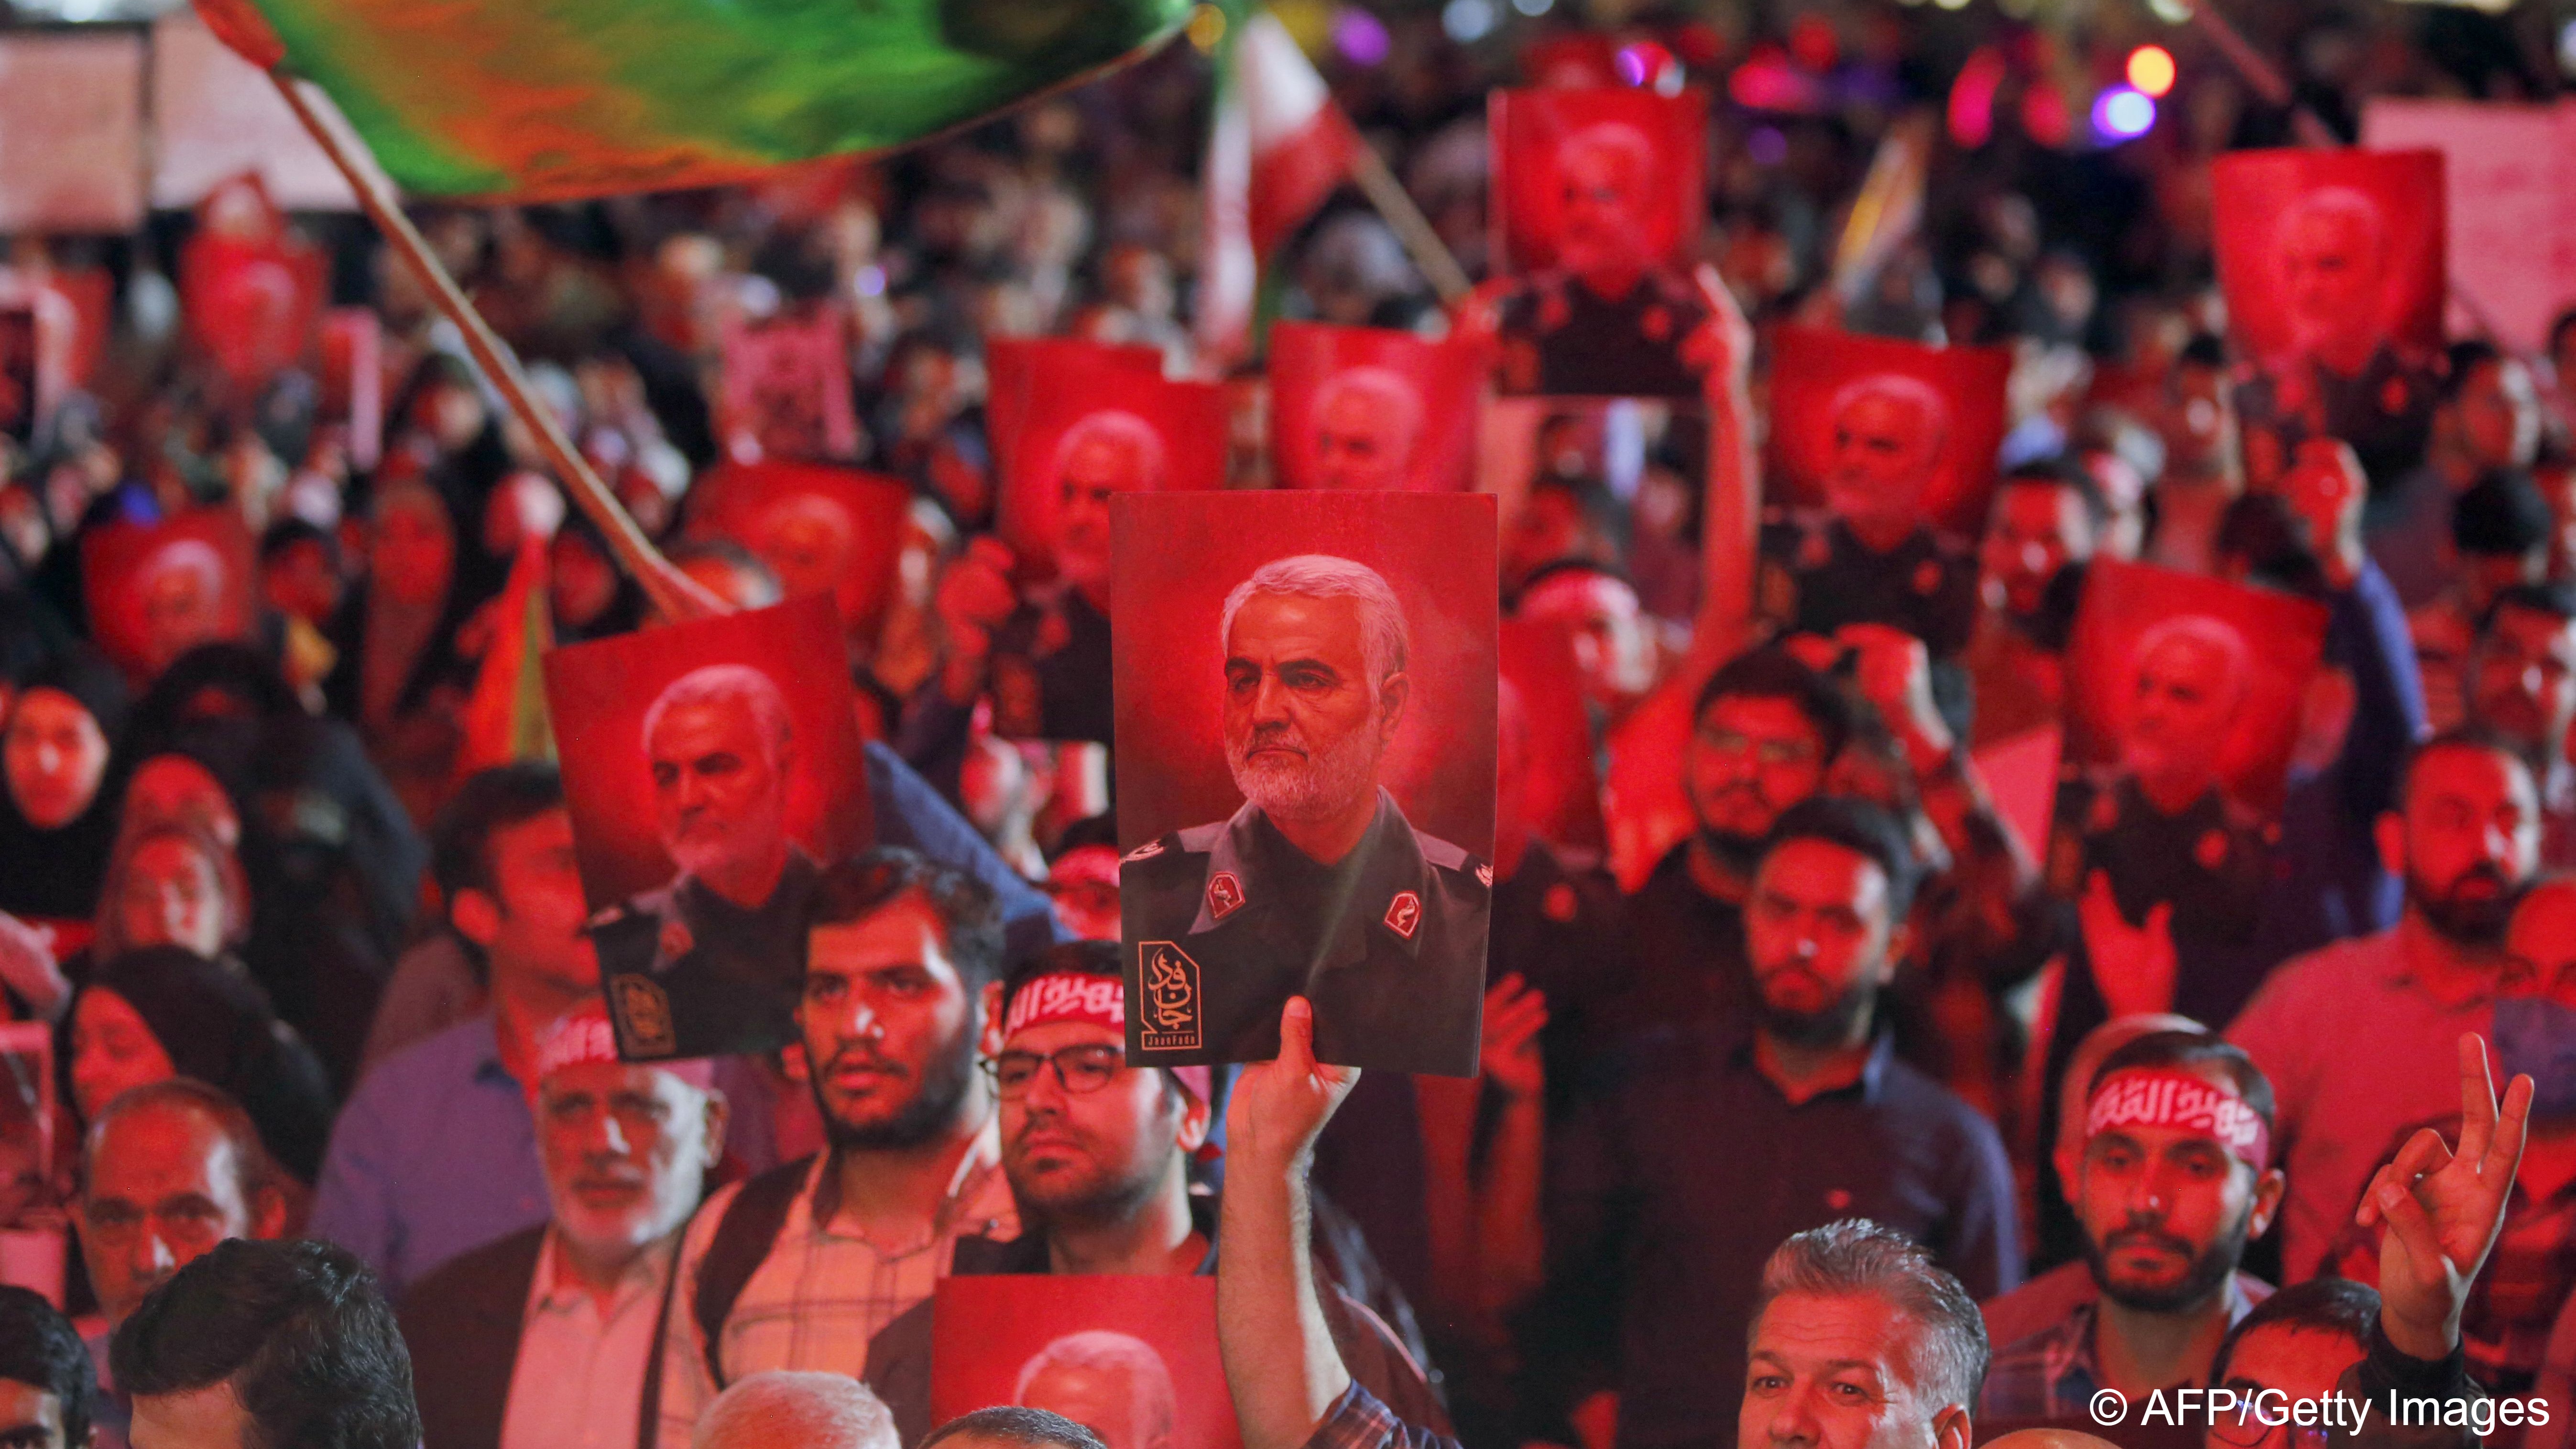 Pictures of slain Revolutionary Guards commander Qasem Soleimani at a rally in Tehran in solidarity with a Hamas offensive against Israel (image: AFP)